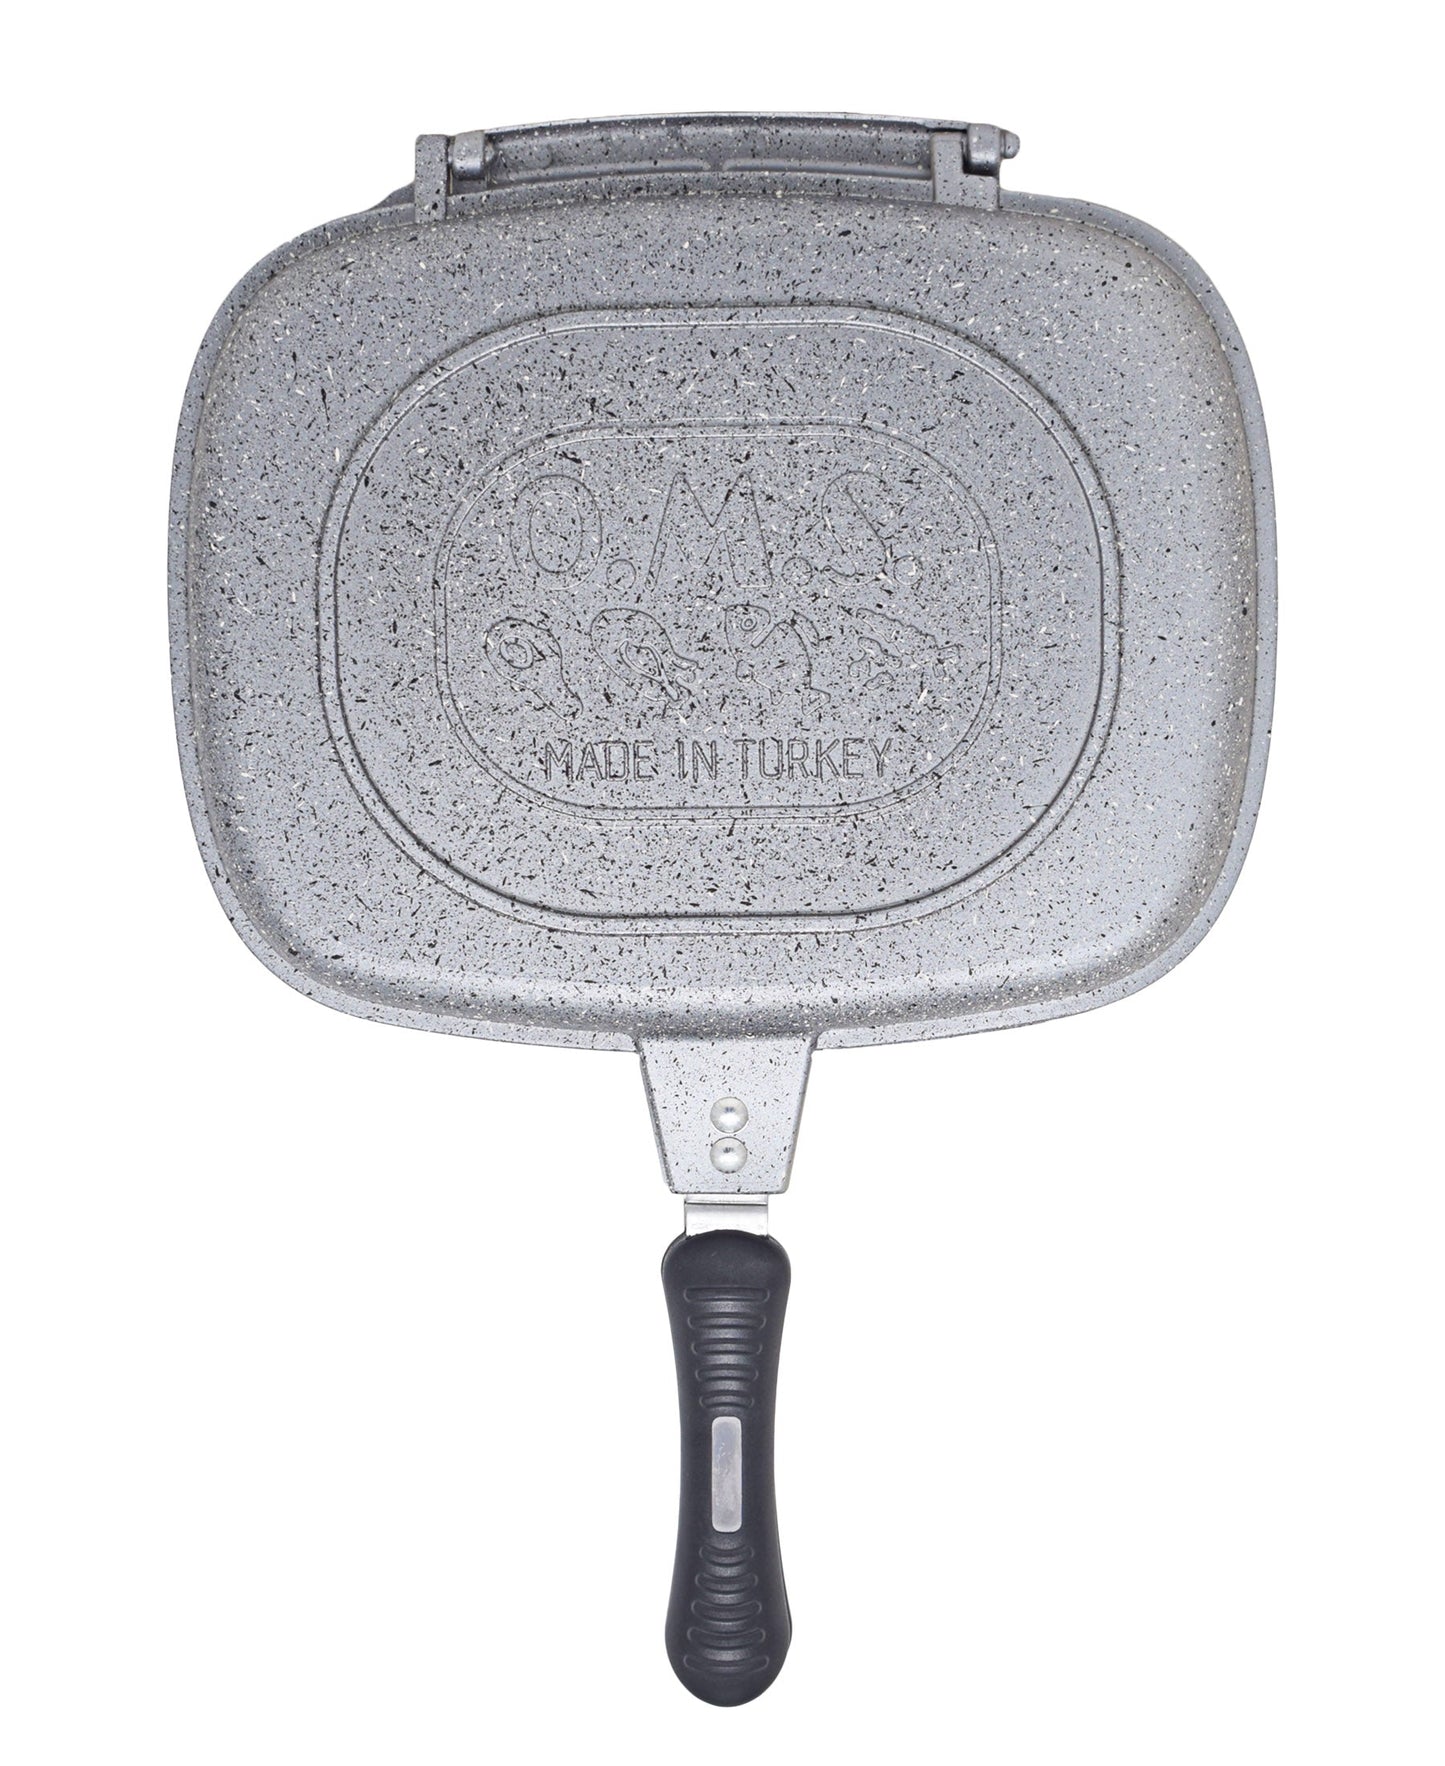 OMS Granite Double Sided Grill Pan - Grey